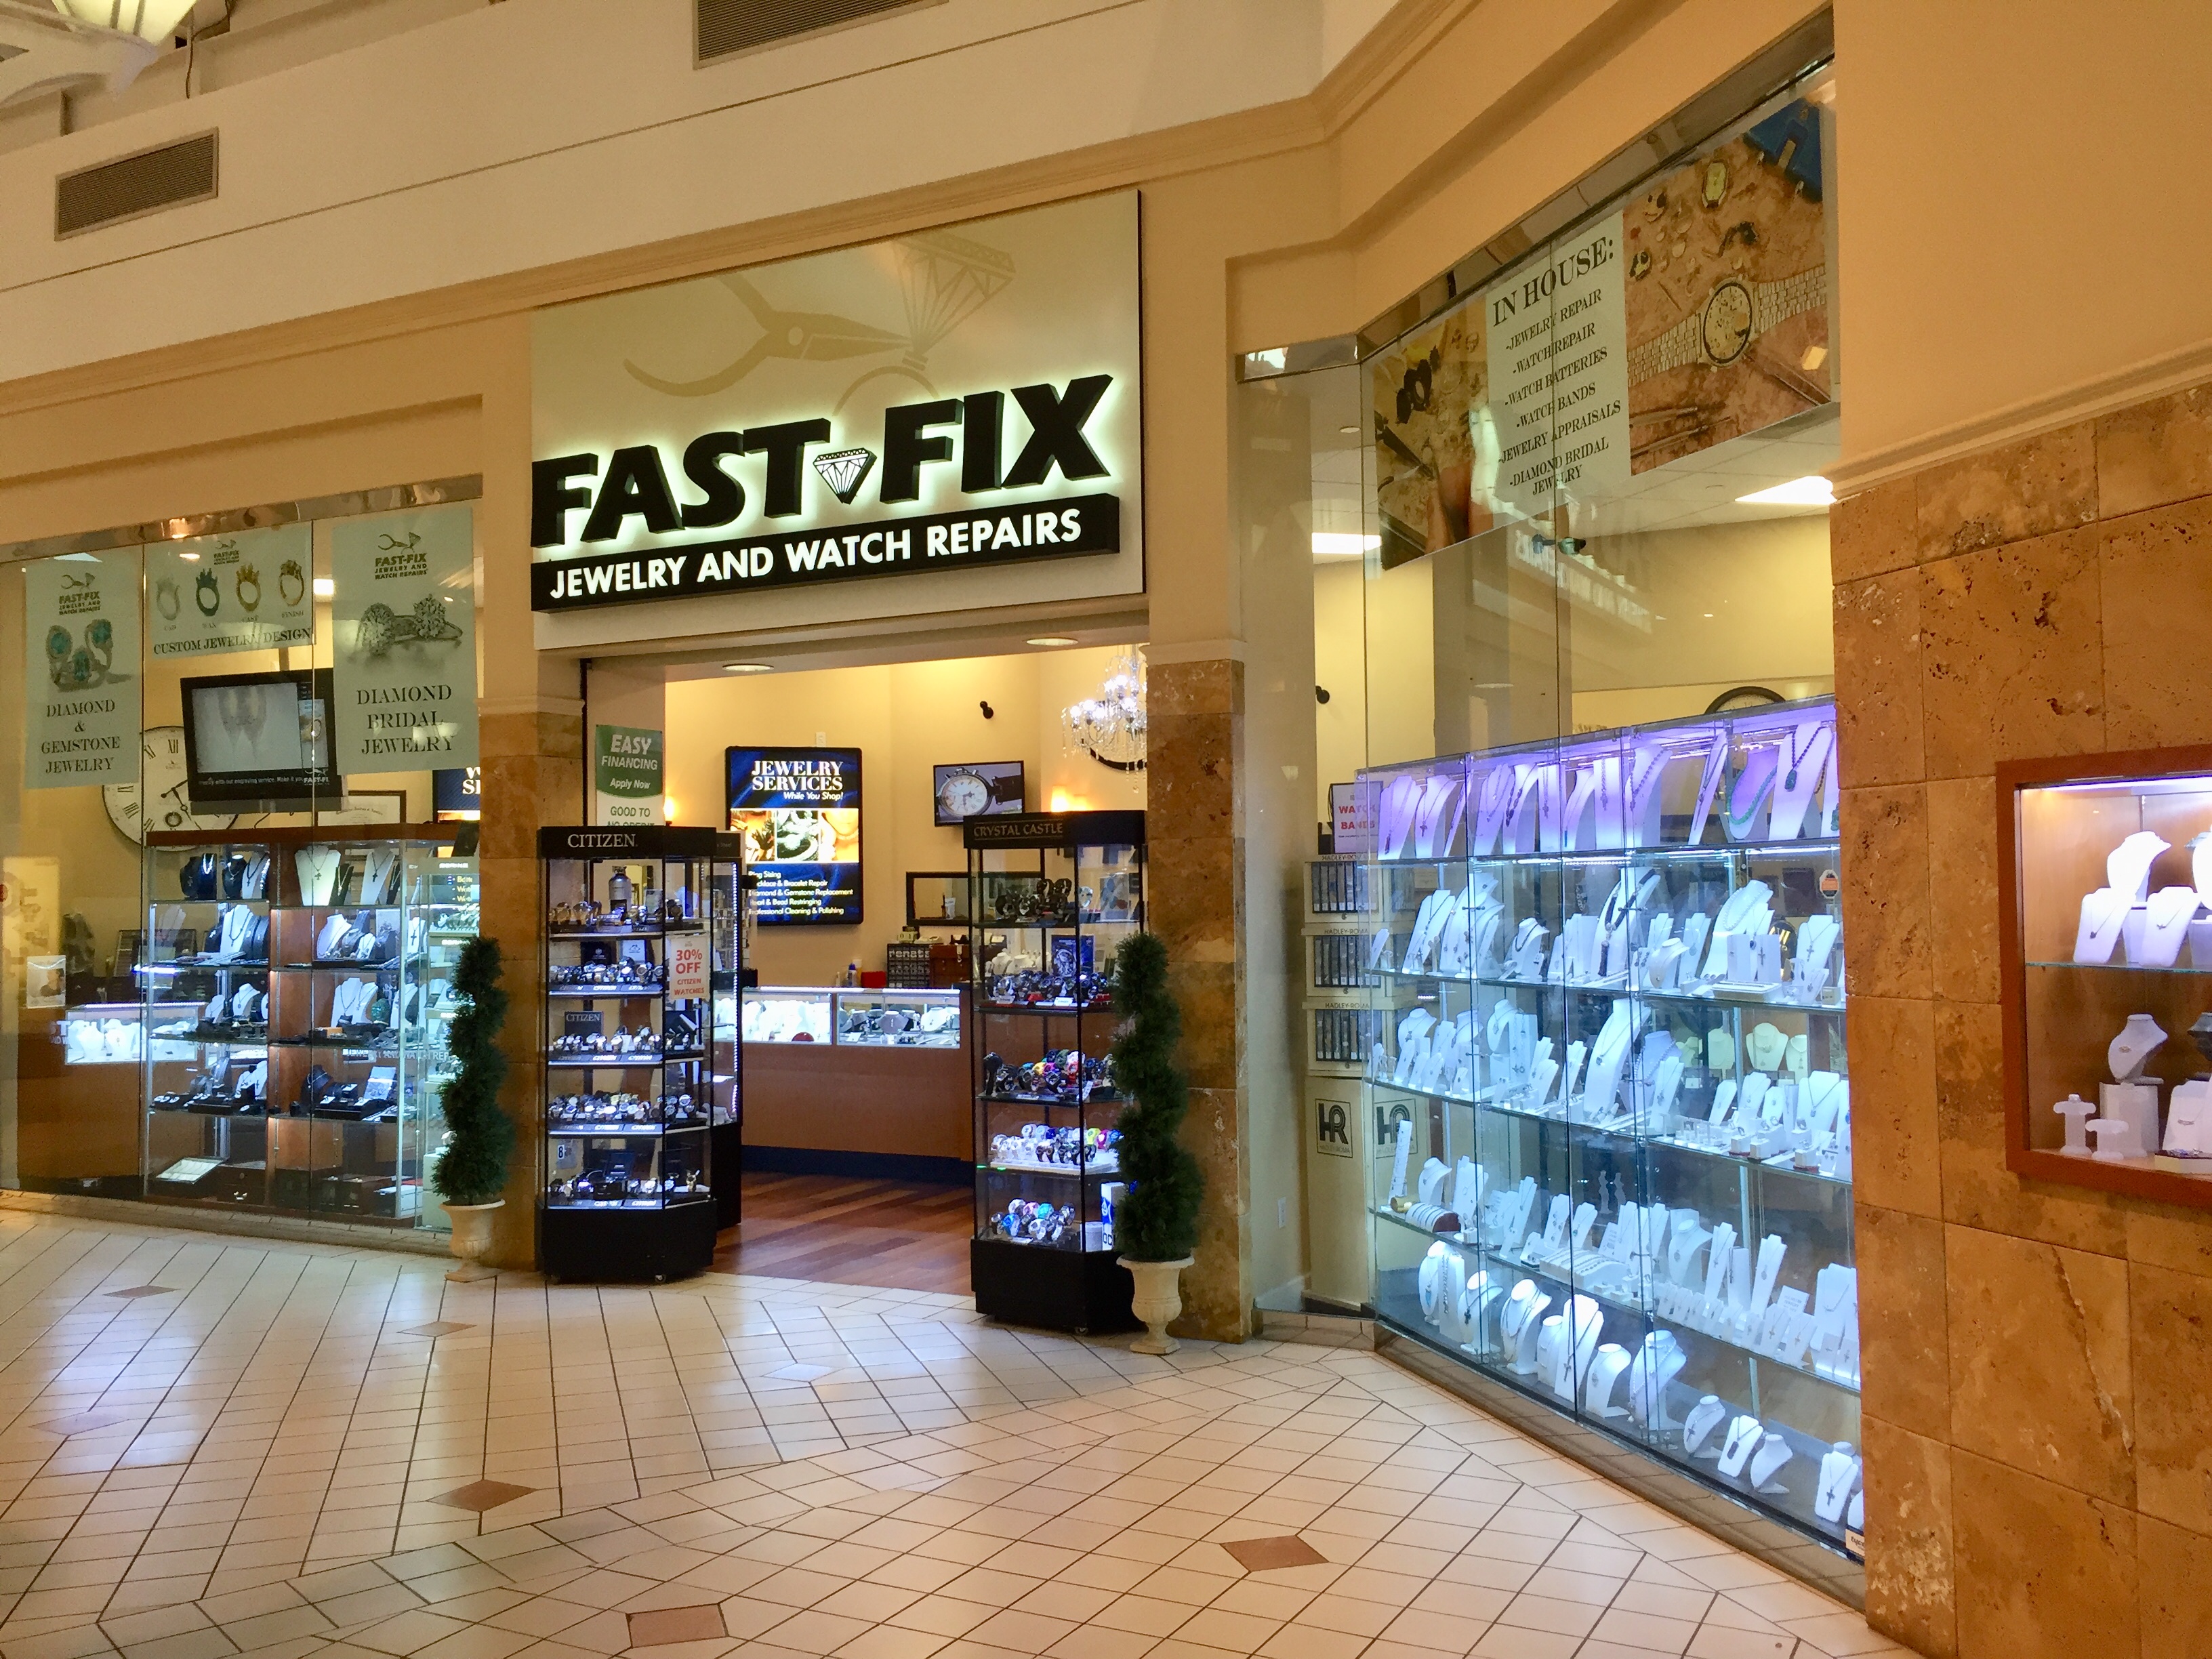 Interior of a Fast-Fix franchise